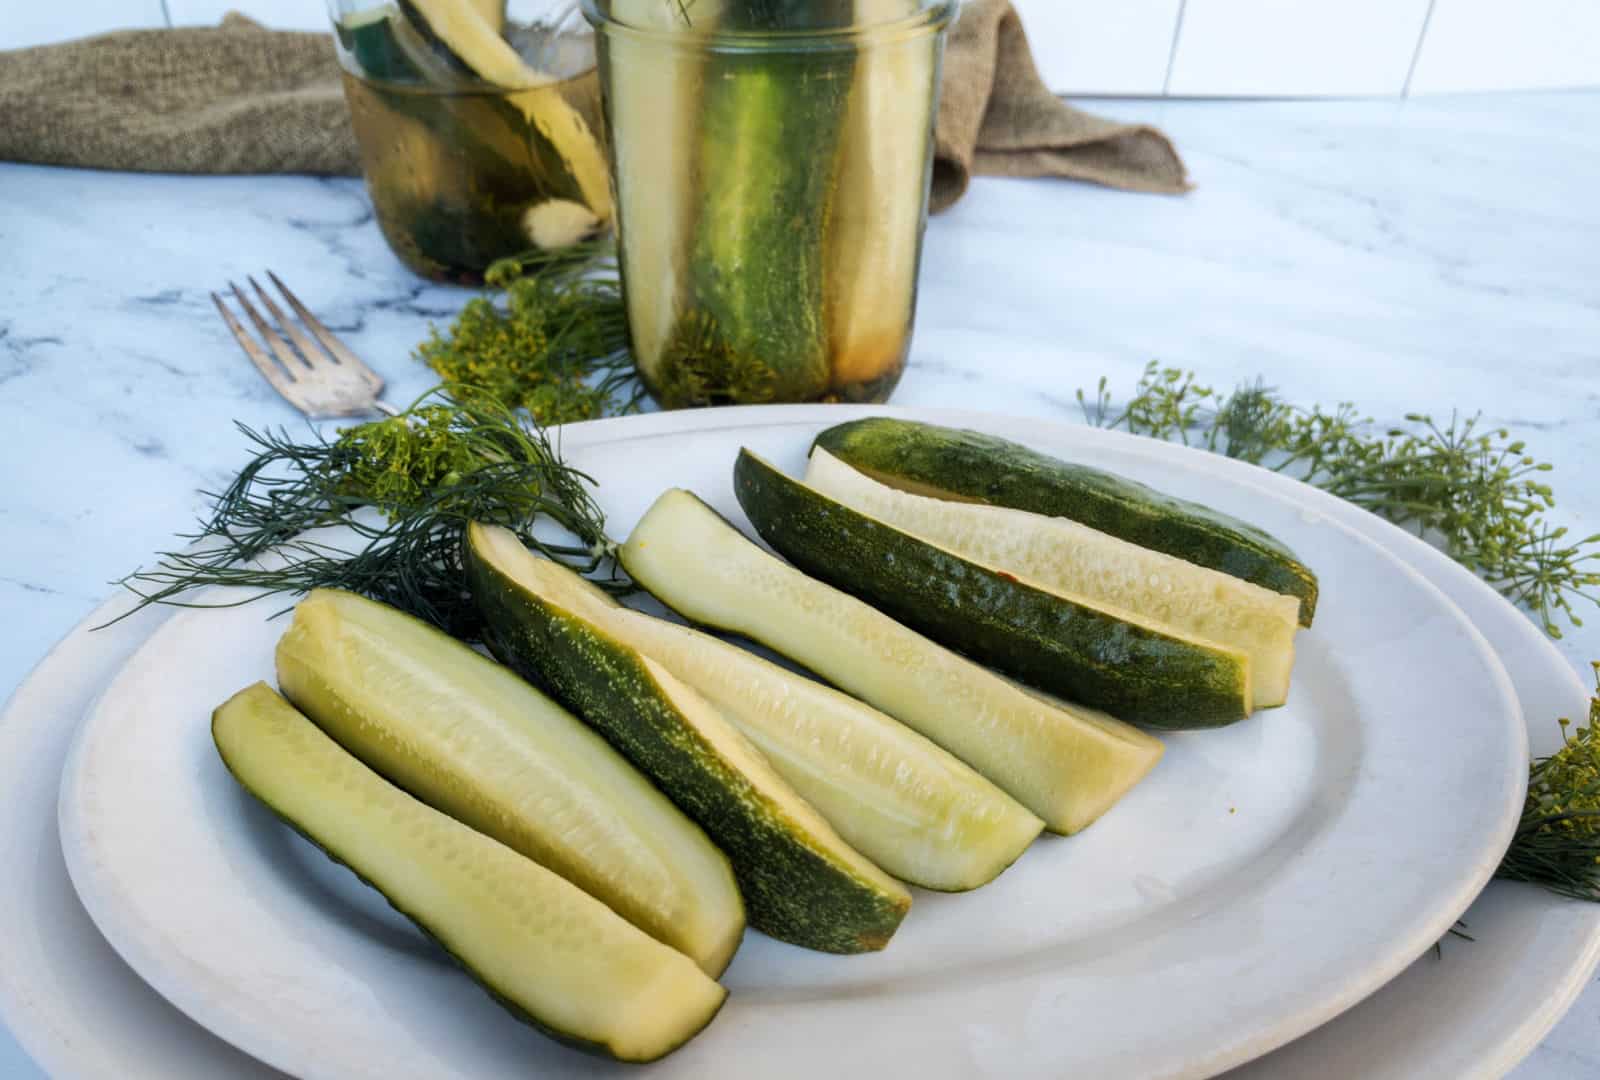 Sliced pickles on a white plate, with whole pickles in a jar and fresh dill on a table, suggesting a homemade pickling theme.